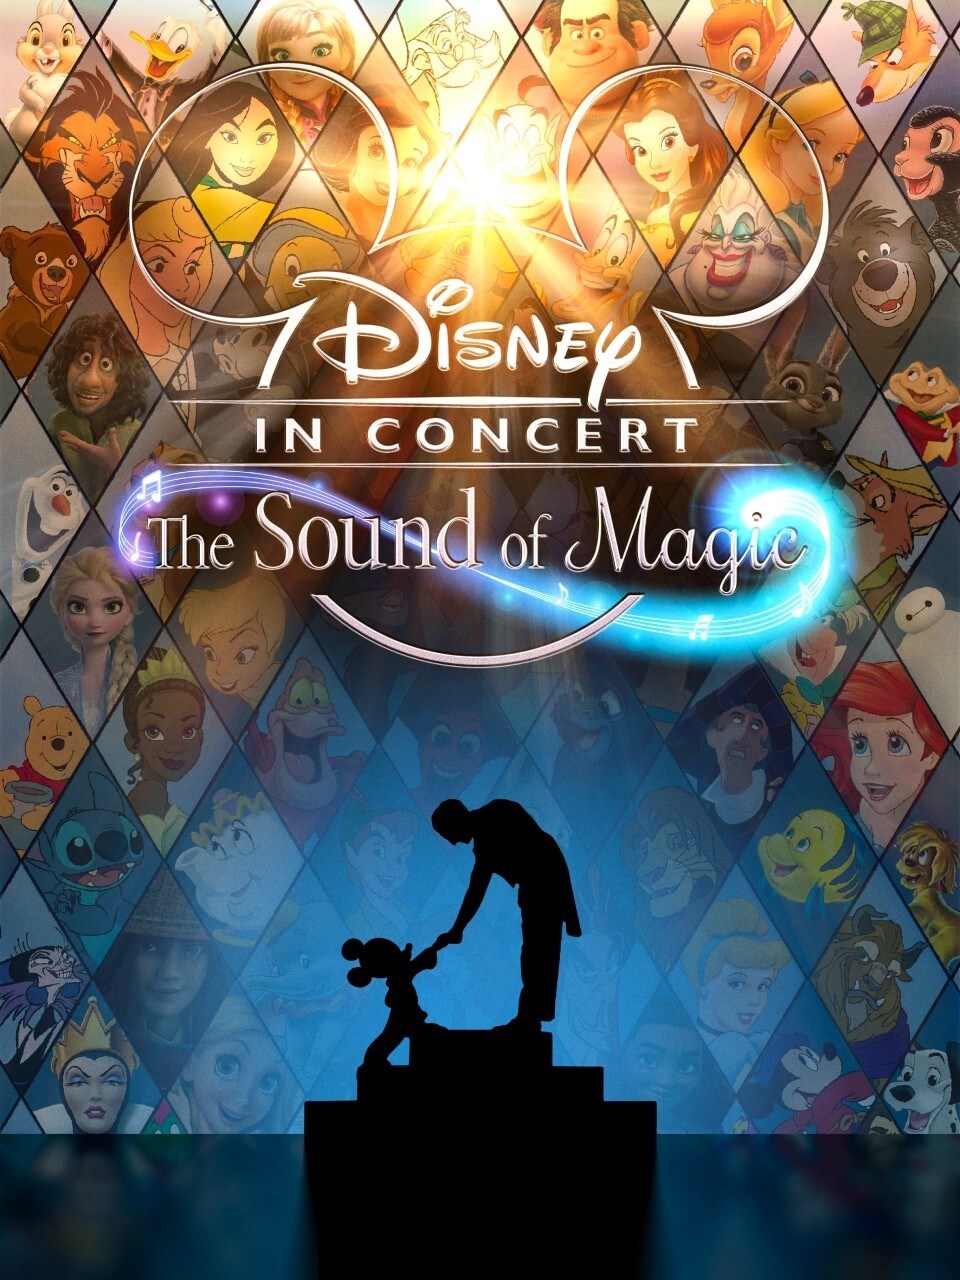 The silhouette of Mickey Mouse greeting the conductor of an orchestra with the Disney in Concert: The Sound of Magic logo at the top